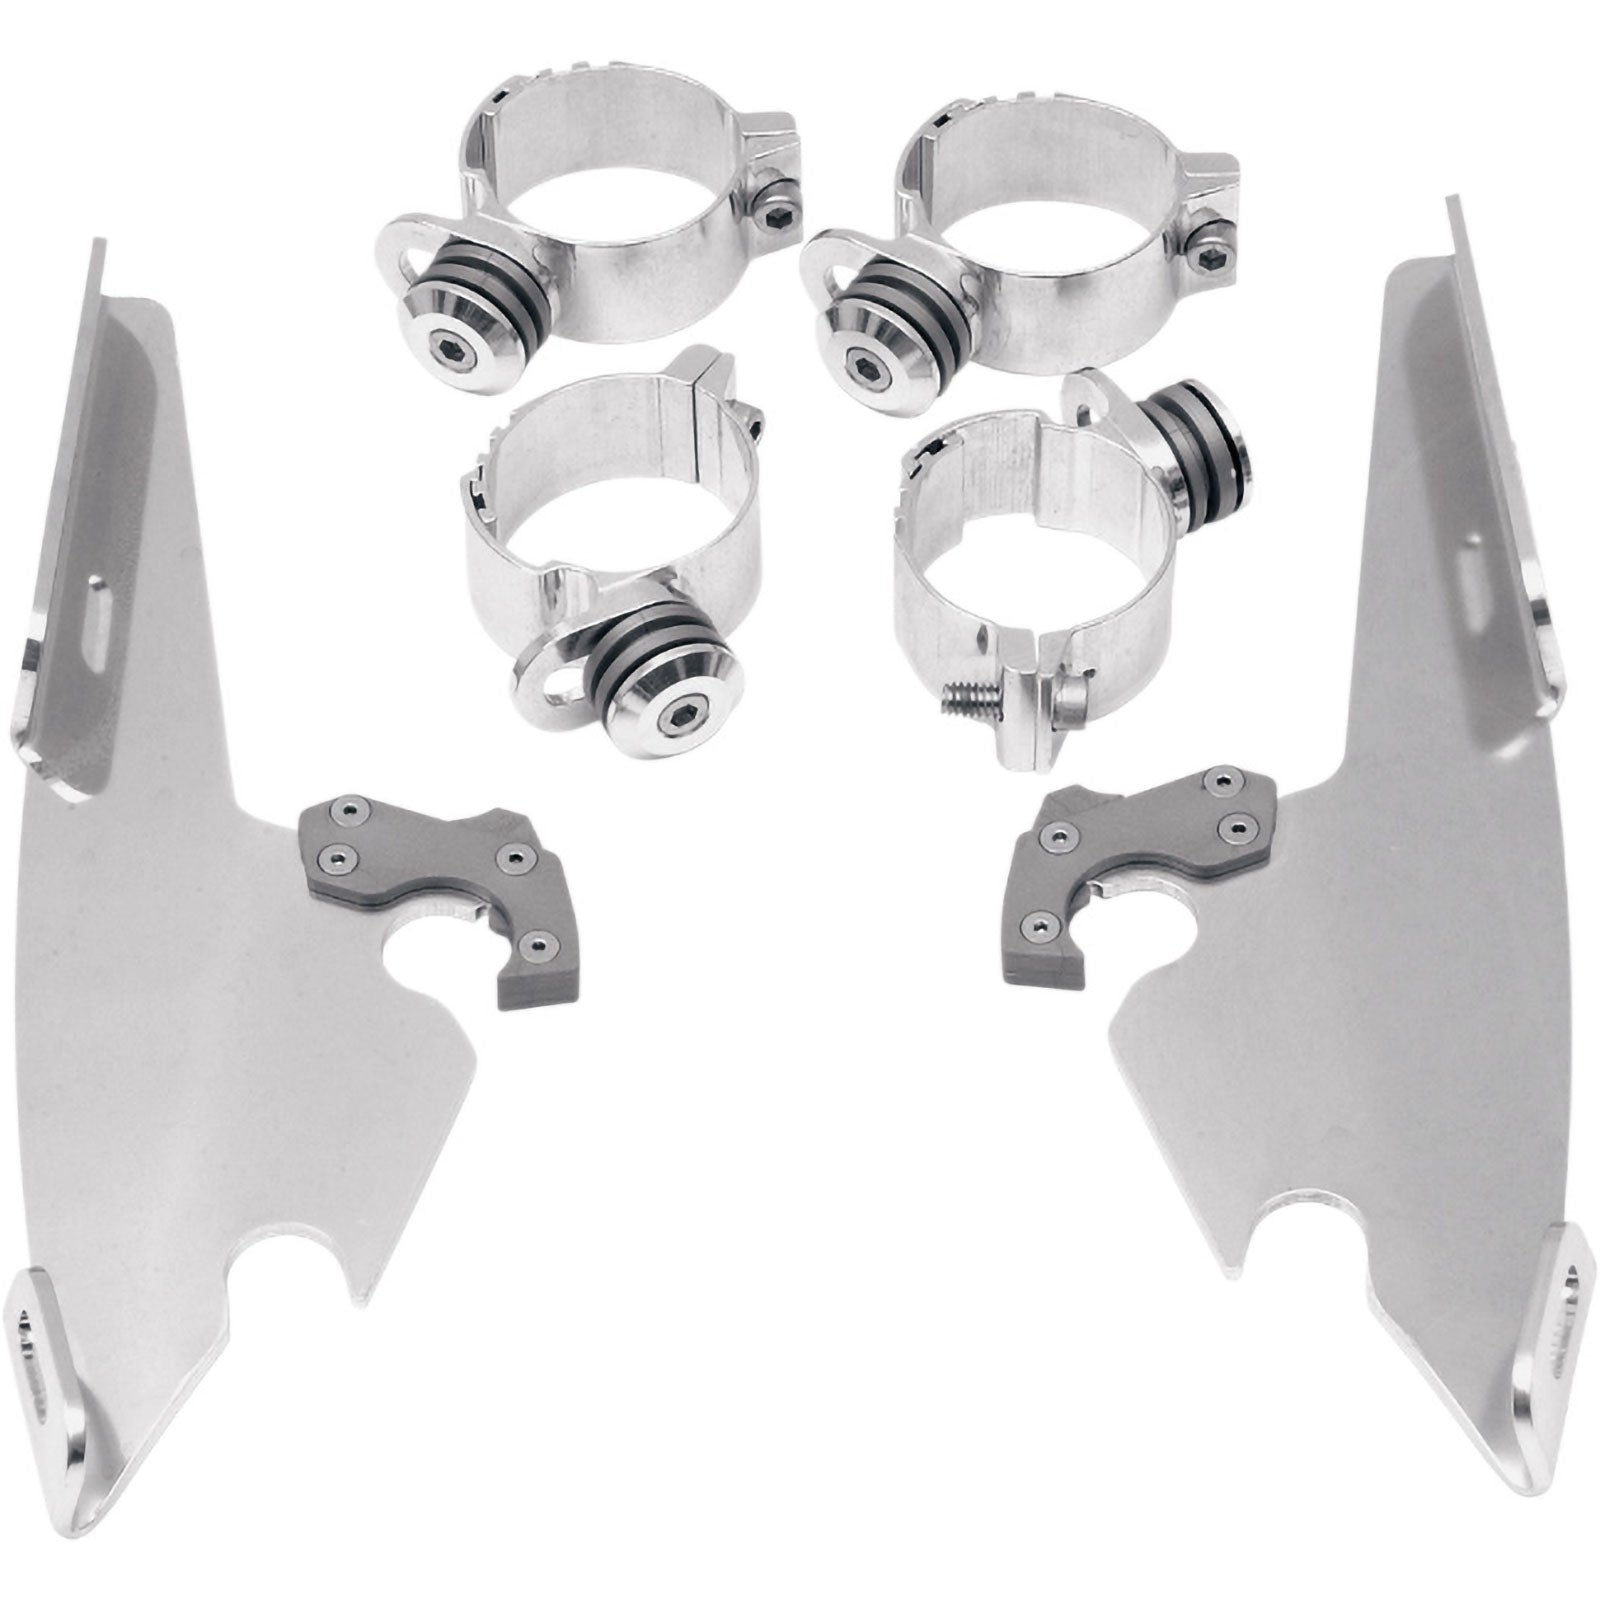 Memphis Shades Dyna Fats/Slim Windshield Trigger-Lock Complete Mount Kit Motorcycle Accessories-2320